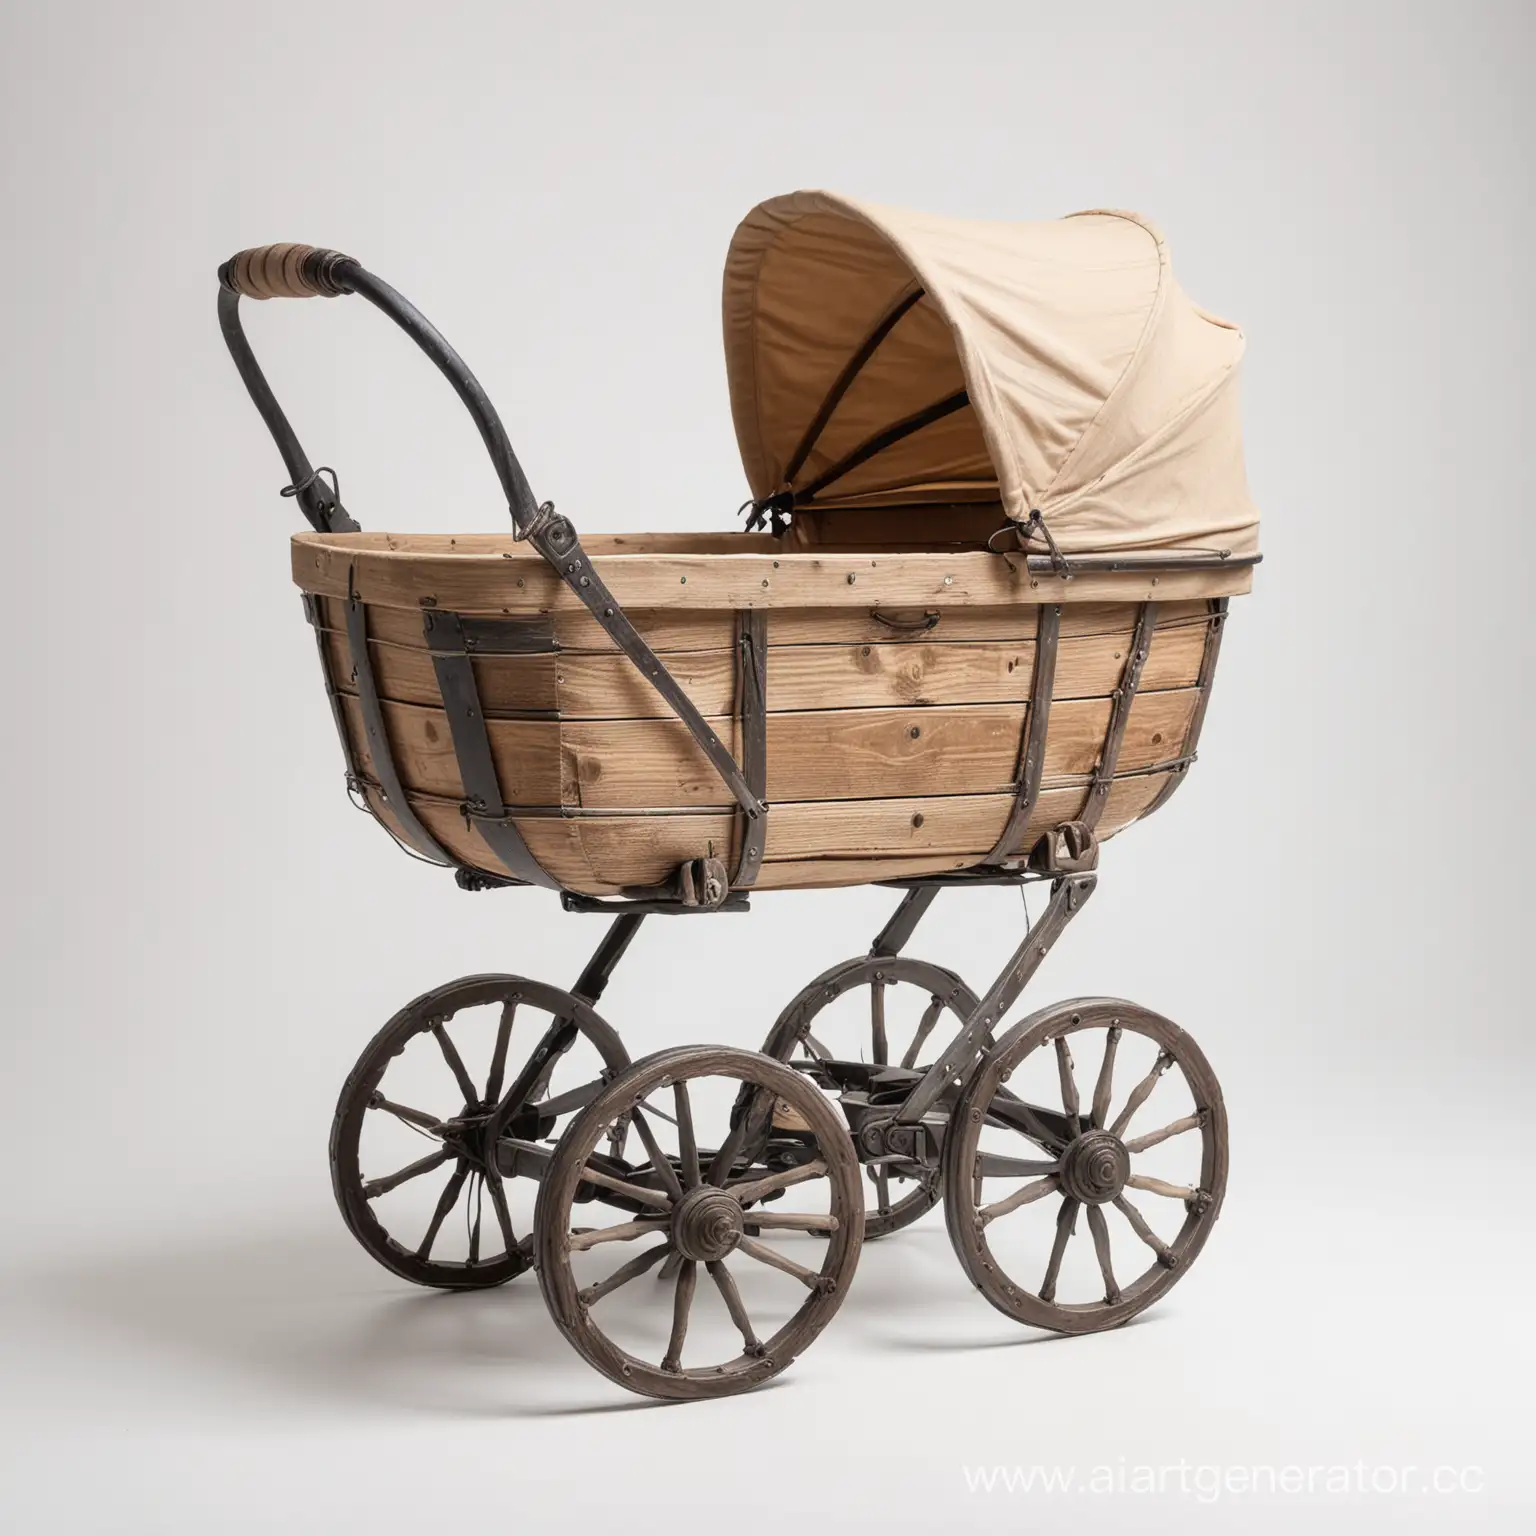 Vintage-Wooden-Baby-Carriage-with-Iron-Handle-on-White-Background